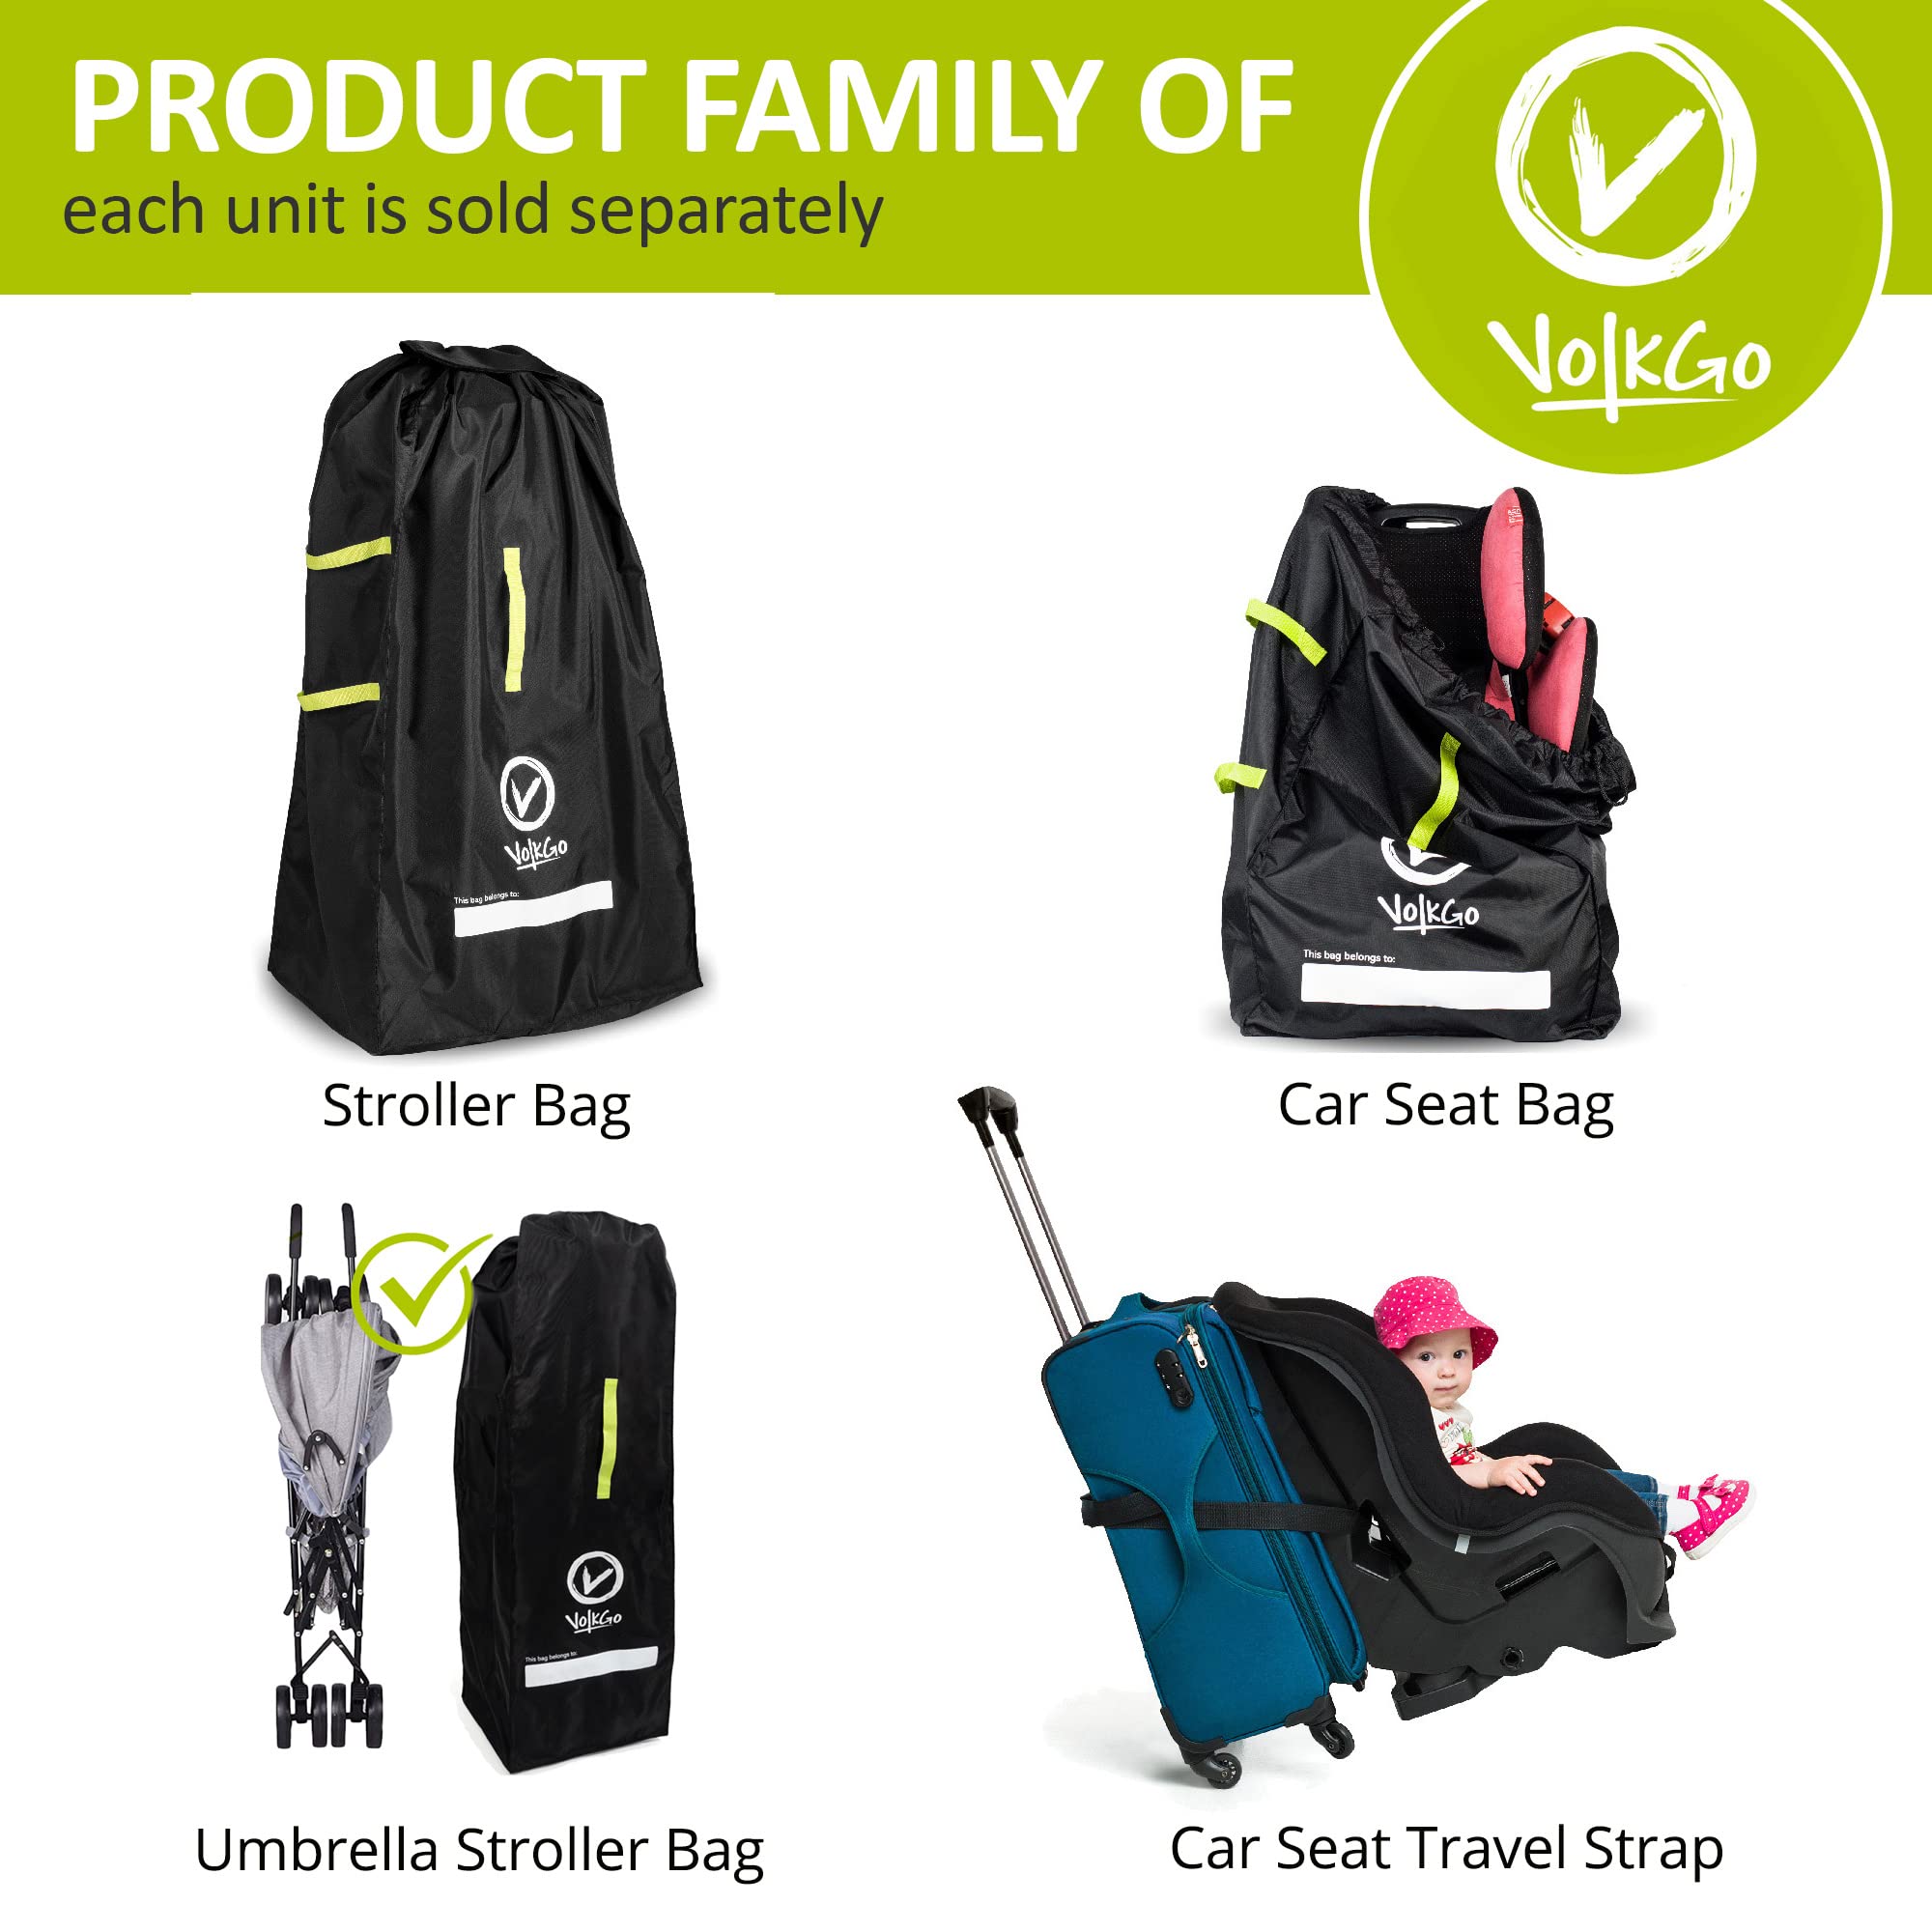 Car Seat Bags for Air Travel, Car Seat Travel Bag for Airplane, Easy Carry Durable Car Seat Gate Check Bag, Car Seat Bag, Carseat Travel Cover, Carseat Travel Bag, Car Seat Cover for Airplane Travel